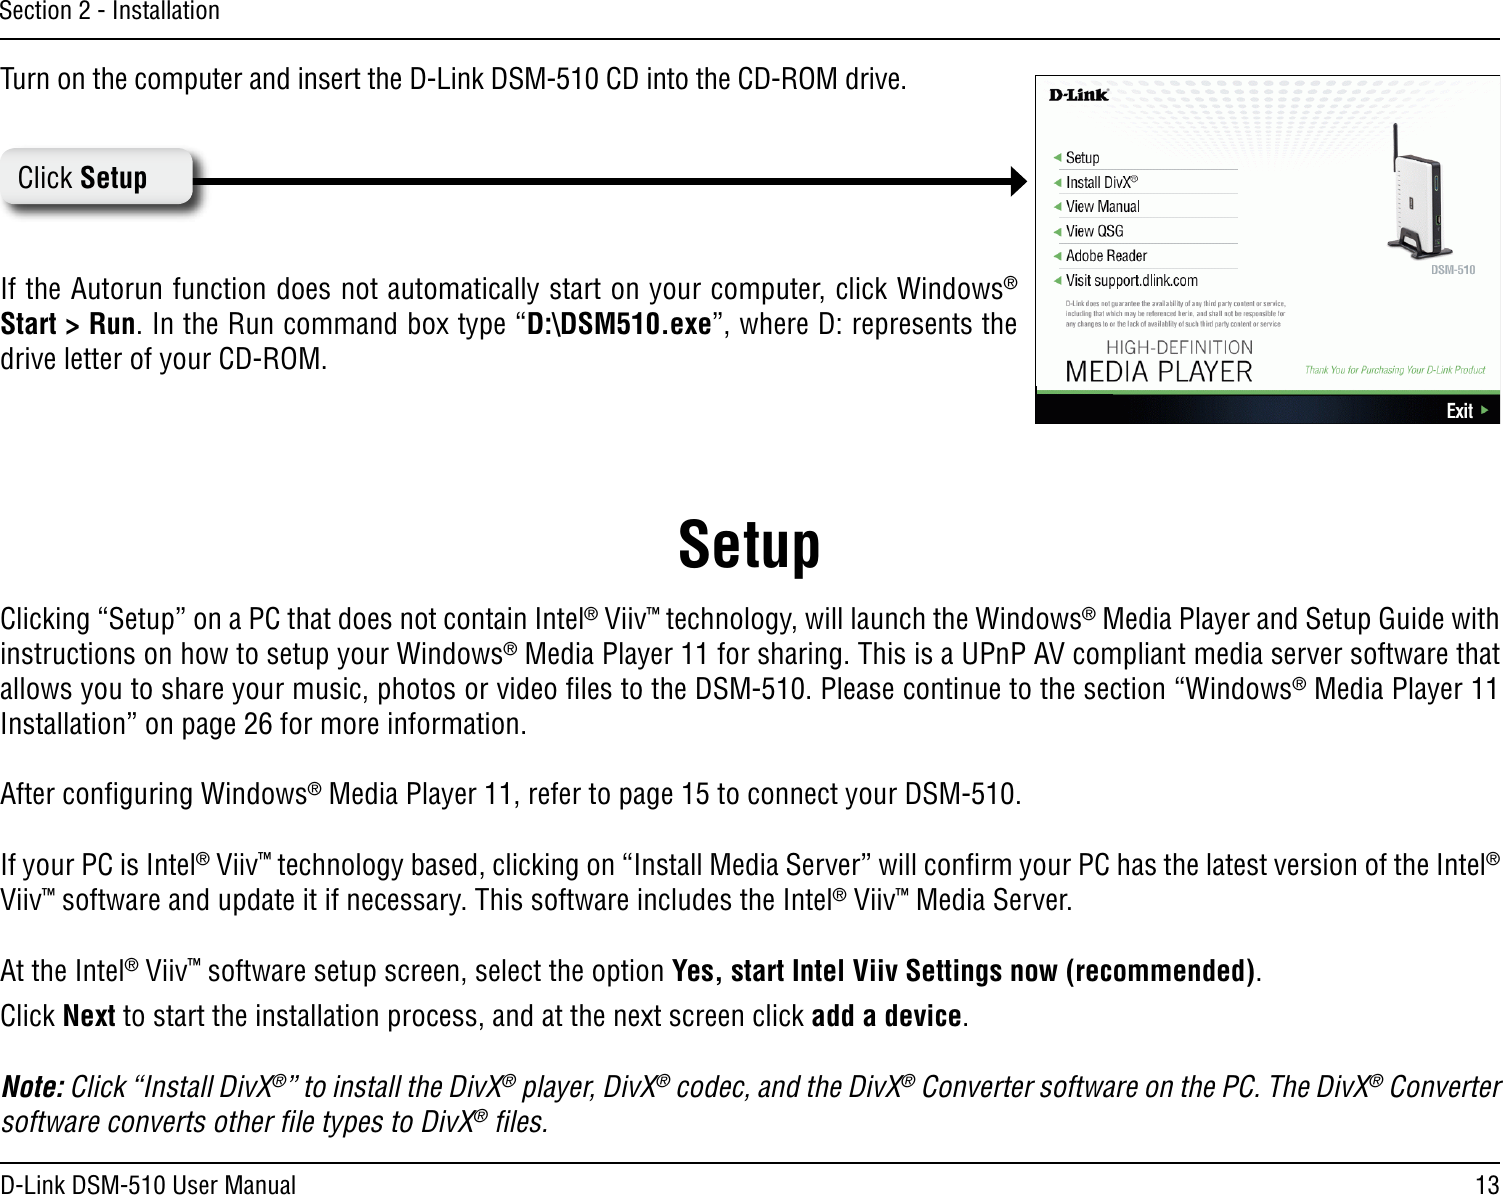 13D-Link DSM-510 User ManualSection 2 - InstallationTurn on the computer and insert the D-Link DSM-510 CD into the CD-ROM drive. If the Autorun function does not automatically start on your computer, click Windows® Start &gt; Run. In the Run command box type “D:\DSM510.exe”, where D: represents the drive letter of your CD-ROM. Click SetupClicking “Setup” on a PC that does not contain Intel® Viiv™ technology, will launch the Windows® Media Player and Setup Guide with instructions on how to setup your Windows® Media Player 11 for sharing. This is a UPnP AV compliant media server software that allows you to share your music, photos or video ﬁles to the DSM-510. Please continue to the section “Windows® Media Player 11 Installation” on page 26 for more information.After conﬁguring Windows® Media Player 11, refer to page 15 to connect your DSM-510.If your PC is Intel® Viiv™ technology based, clicking on “Install Media Server” will conﬁrm your PC has the latest version of the Intel® Viiv™ software and update it if necessary. This software includes the Intel® Viiv™ Media Server.At the Intel® Viiv™ software setup screen, select the option Yes, start Intel Viiv Settings now (recommended).Click Next to start the installation process, and at the next screen click add a device.Note: Click “Install DivX®” to install the DivX® player, DivX® codec, and the DivX® Converter software on the PC. The DivX® Converter software converts other ﬁle types to DivX® ﬁles.Setup